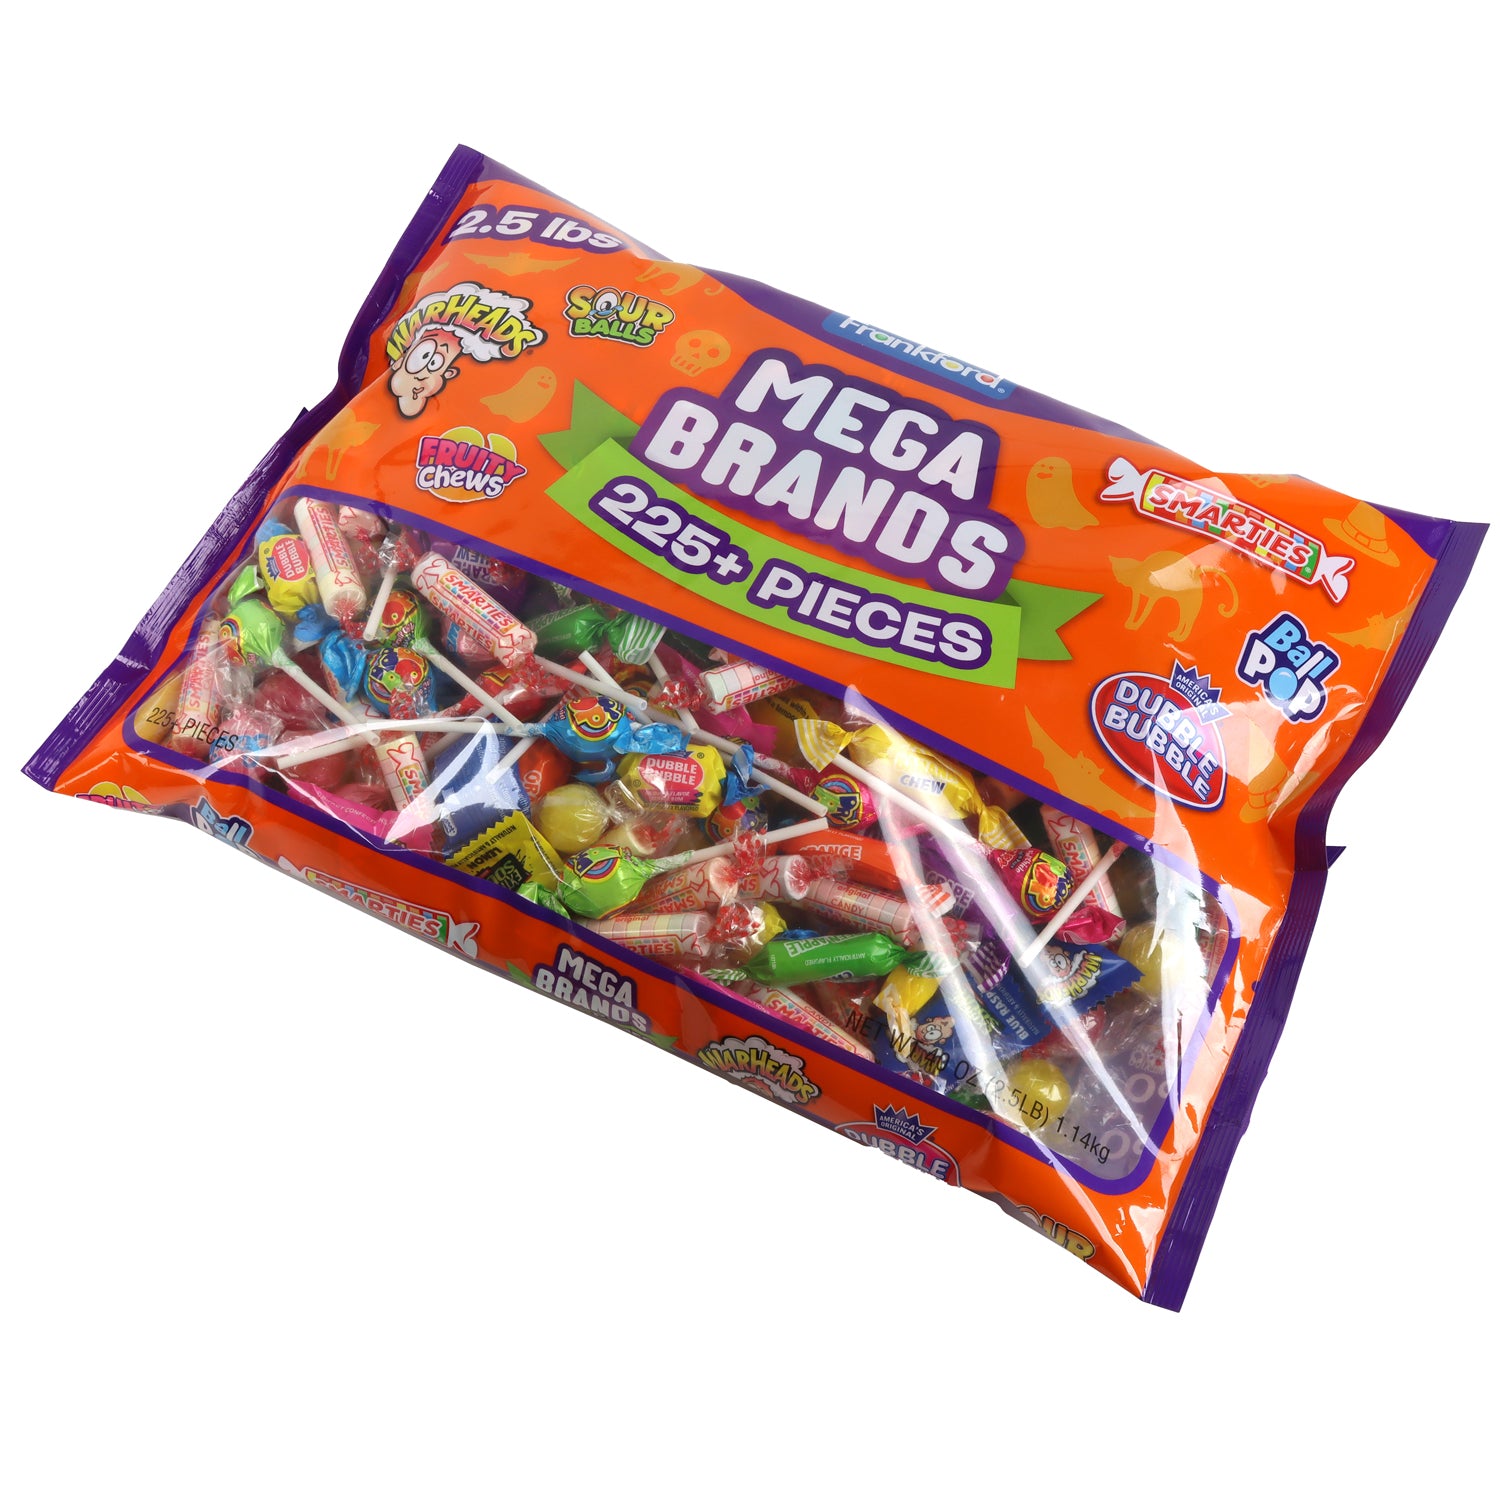 angle of orange bag with individually wrapped candies and gum